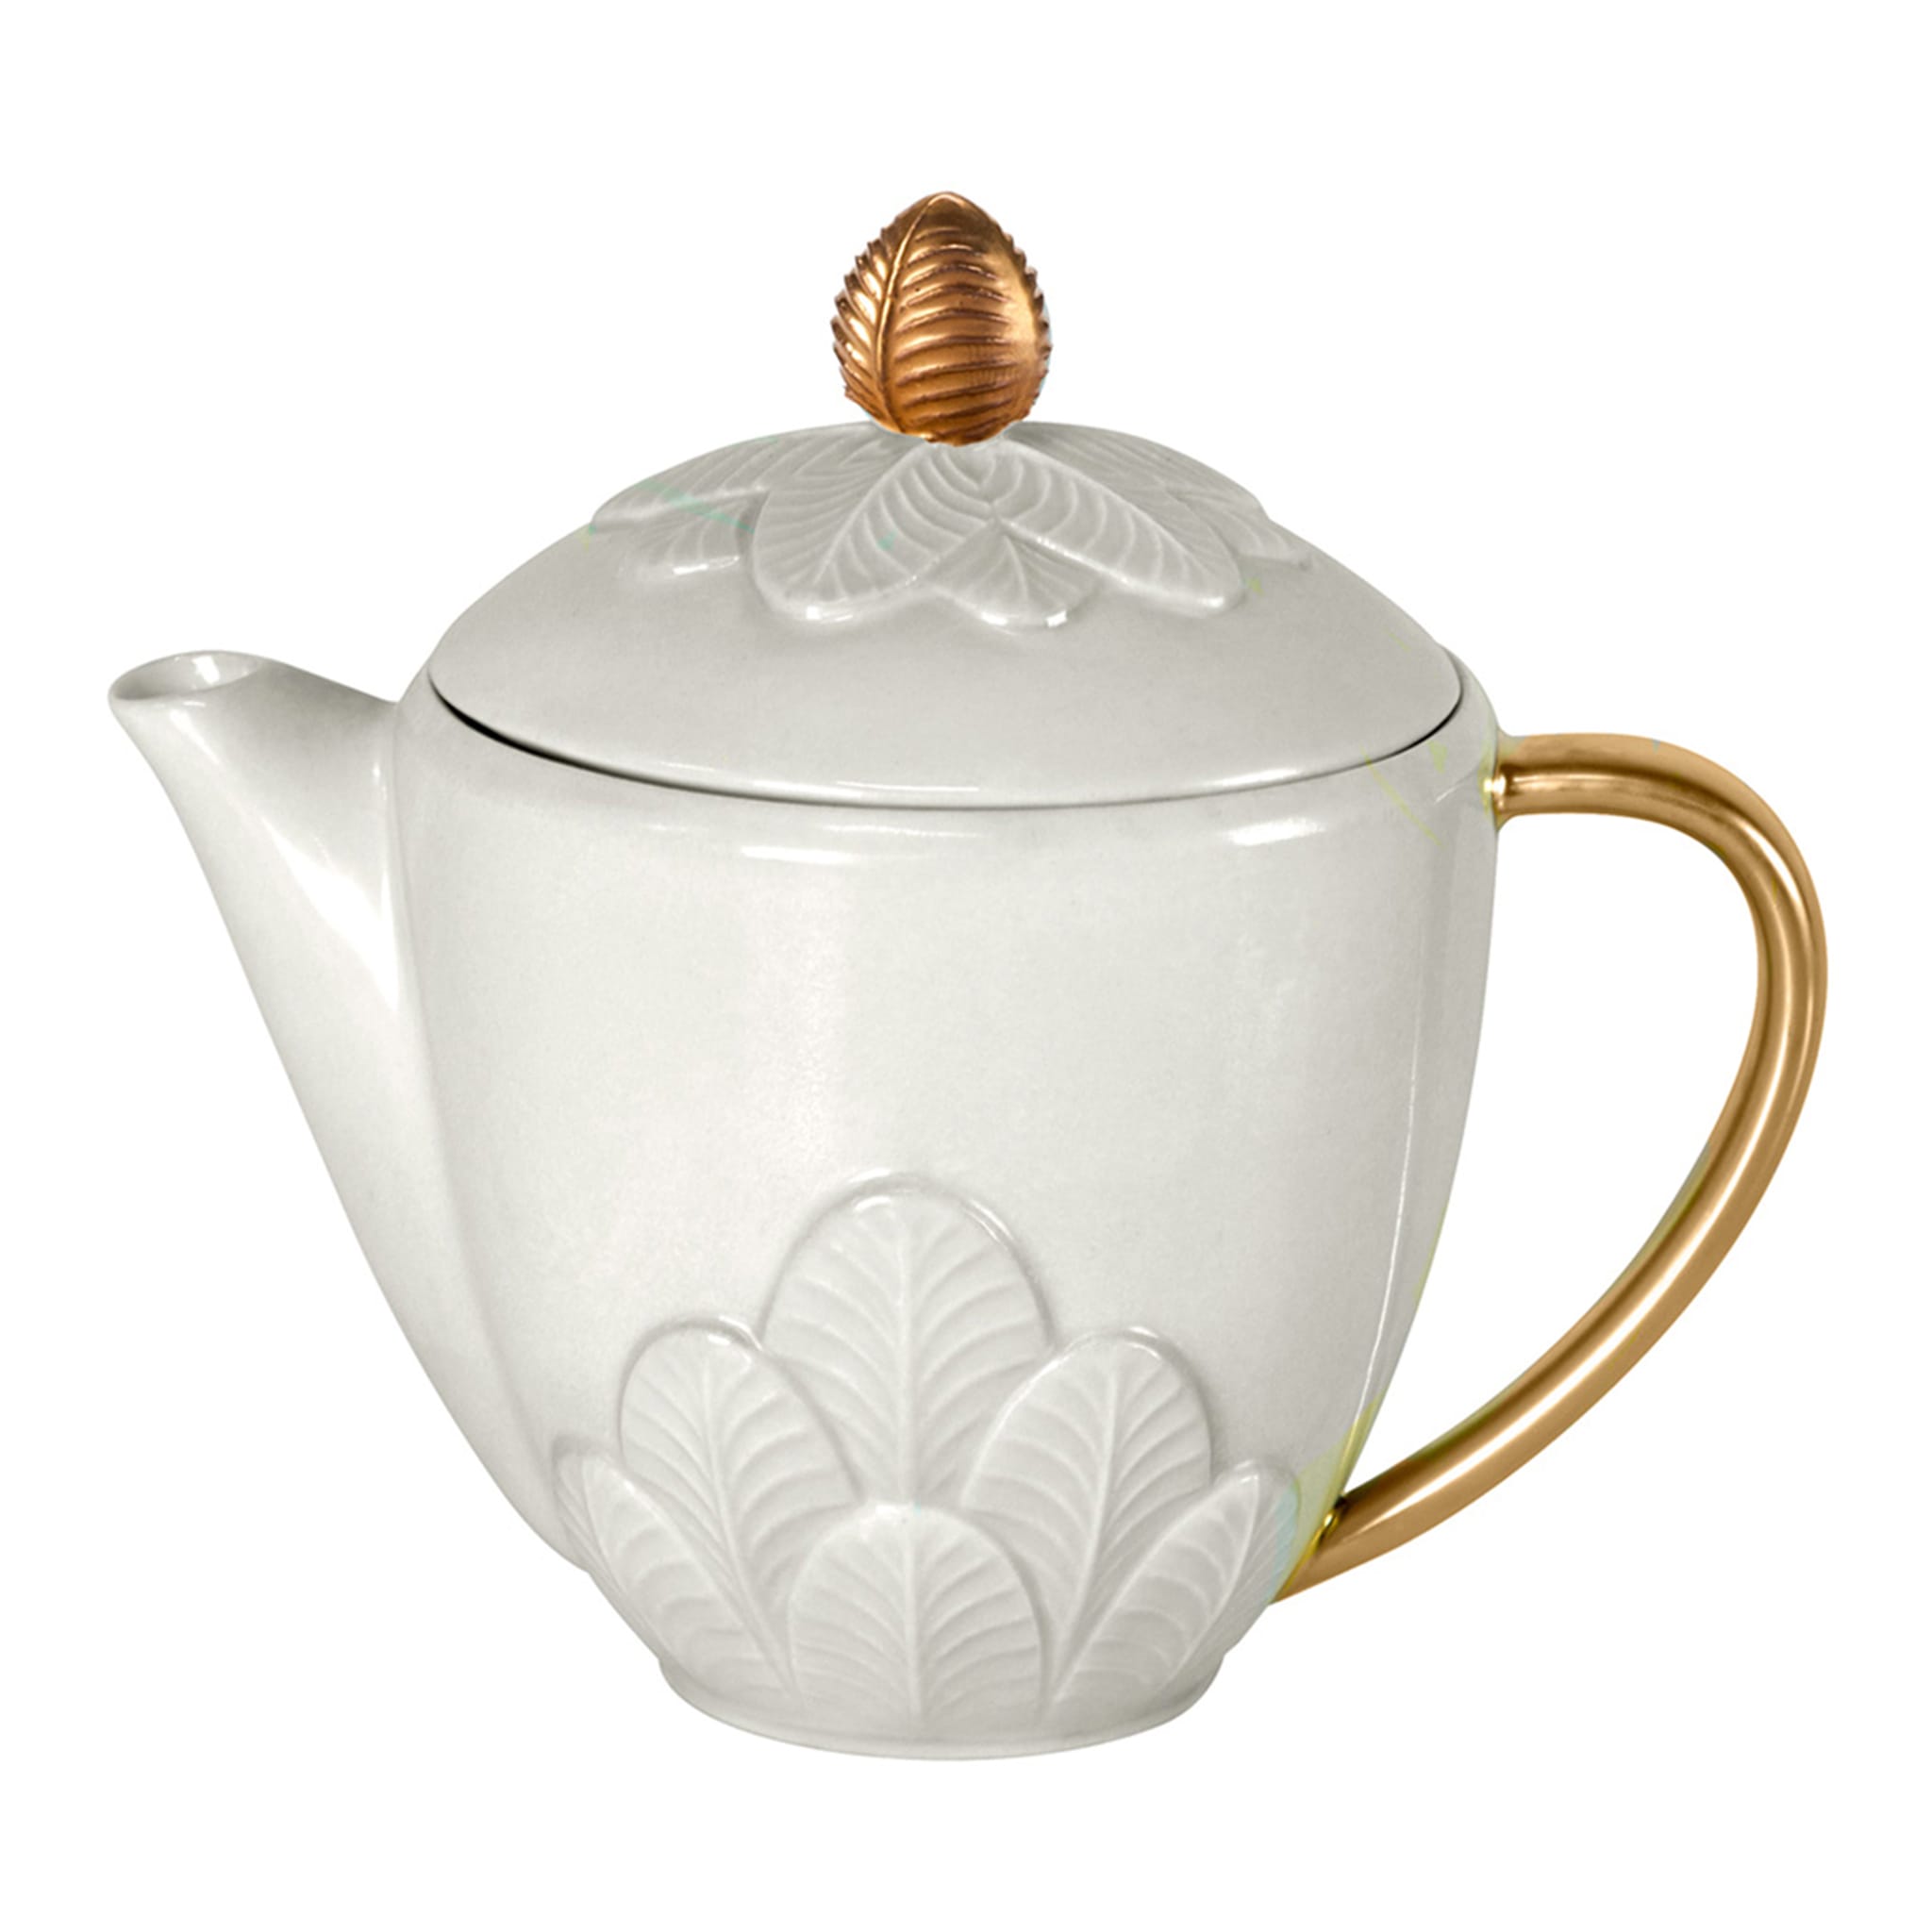 PEACOCK CREAMER - WHITE AND GOLD - Main view